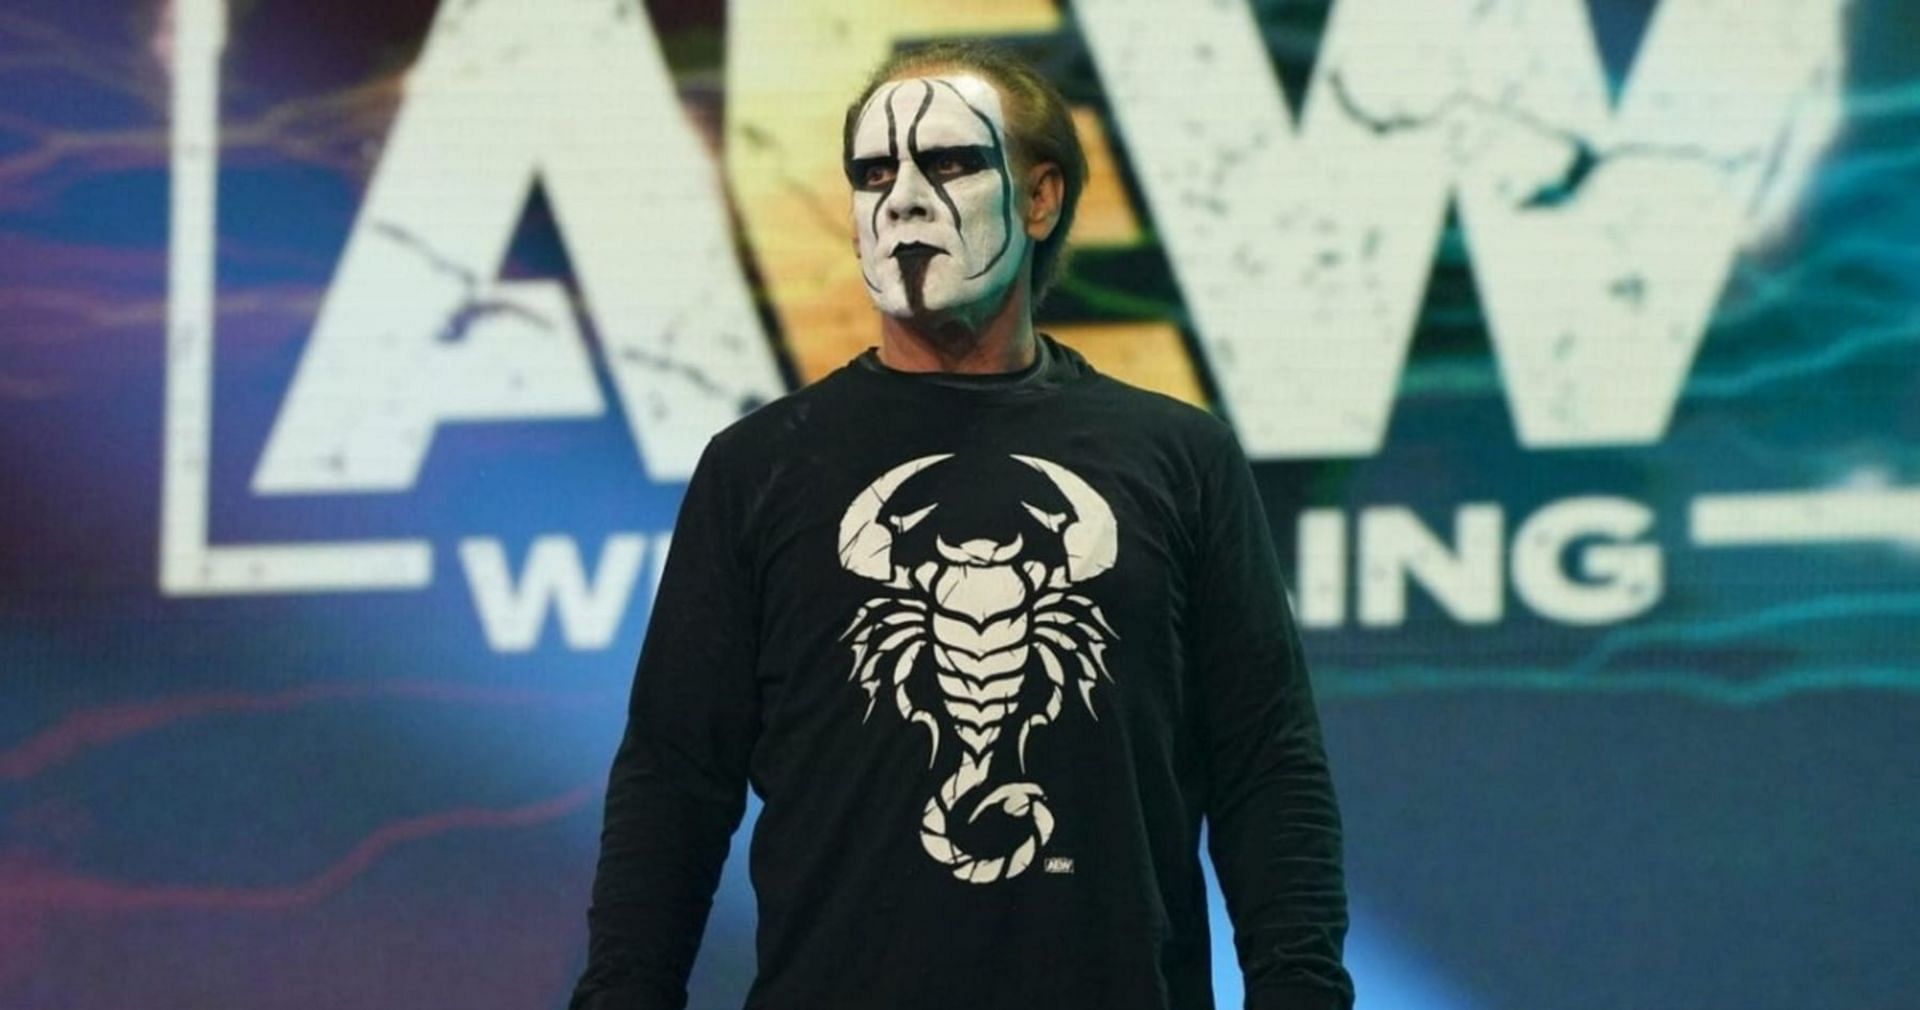 WWE Hall of Famer &quot;The Icon&quot; Sting